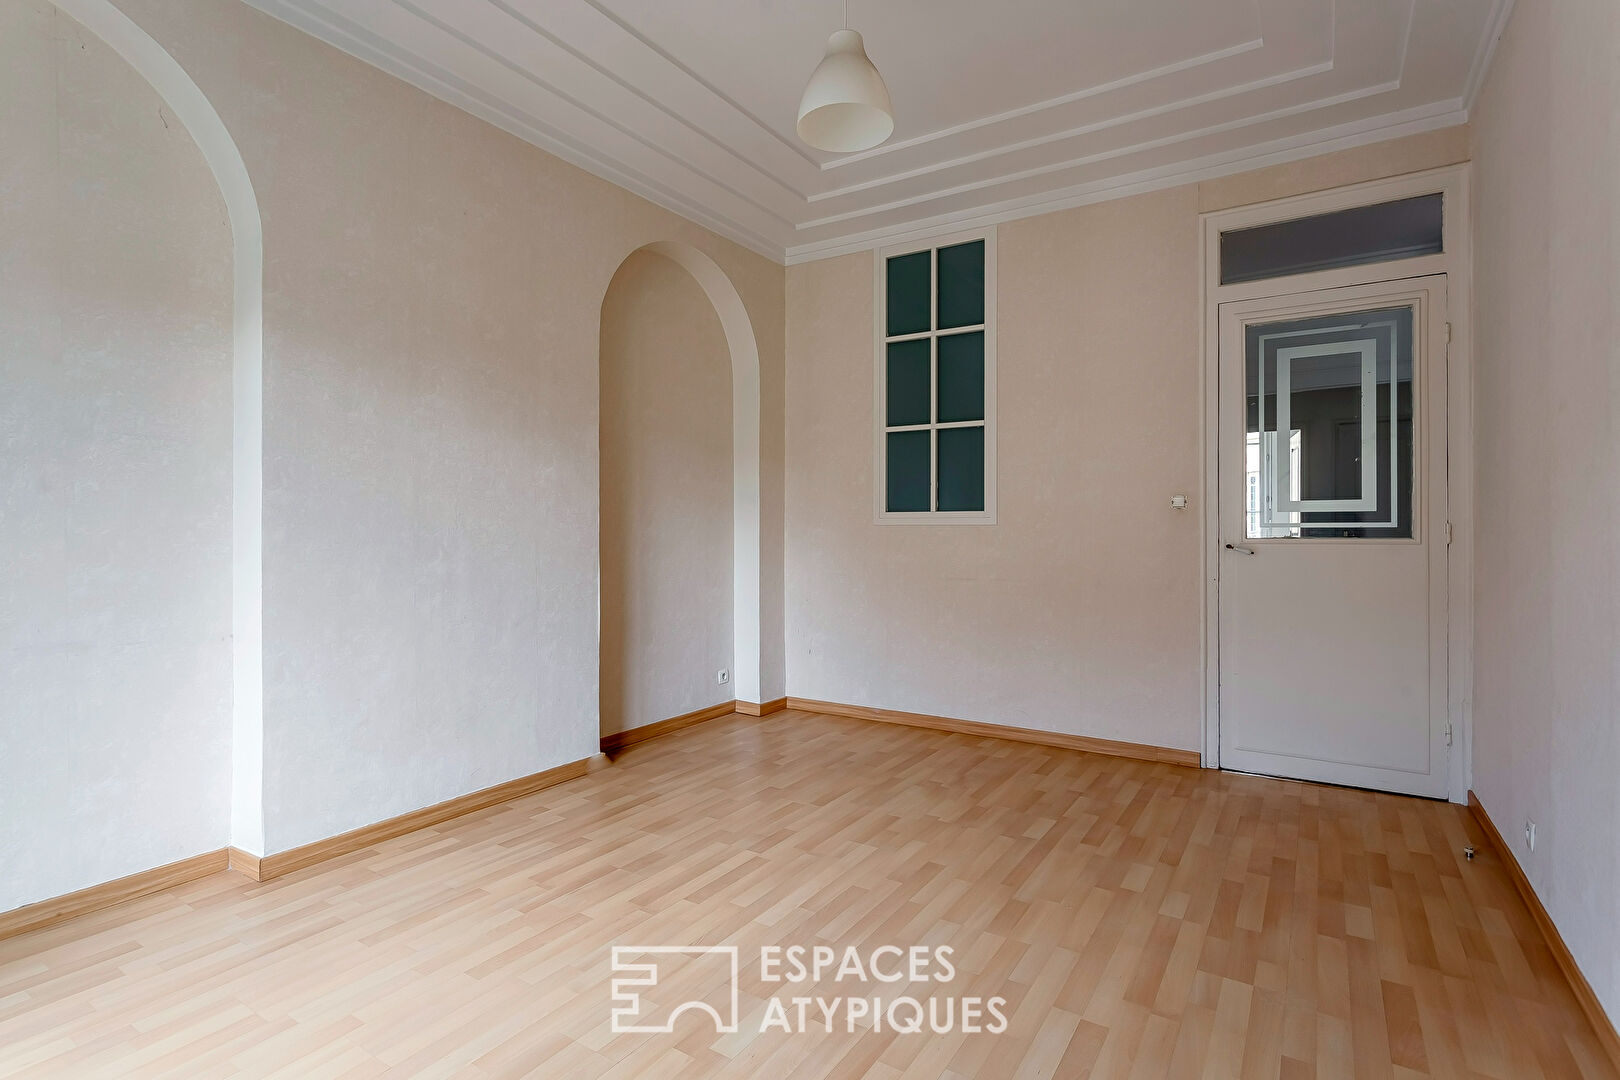 Attractive renovation in the heart of Brotteaux